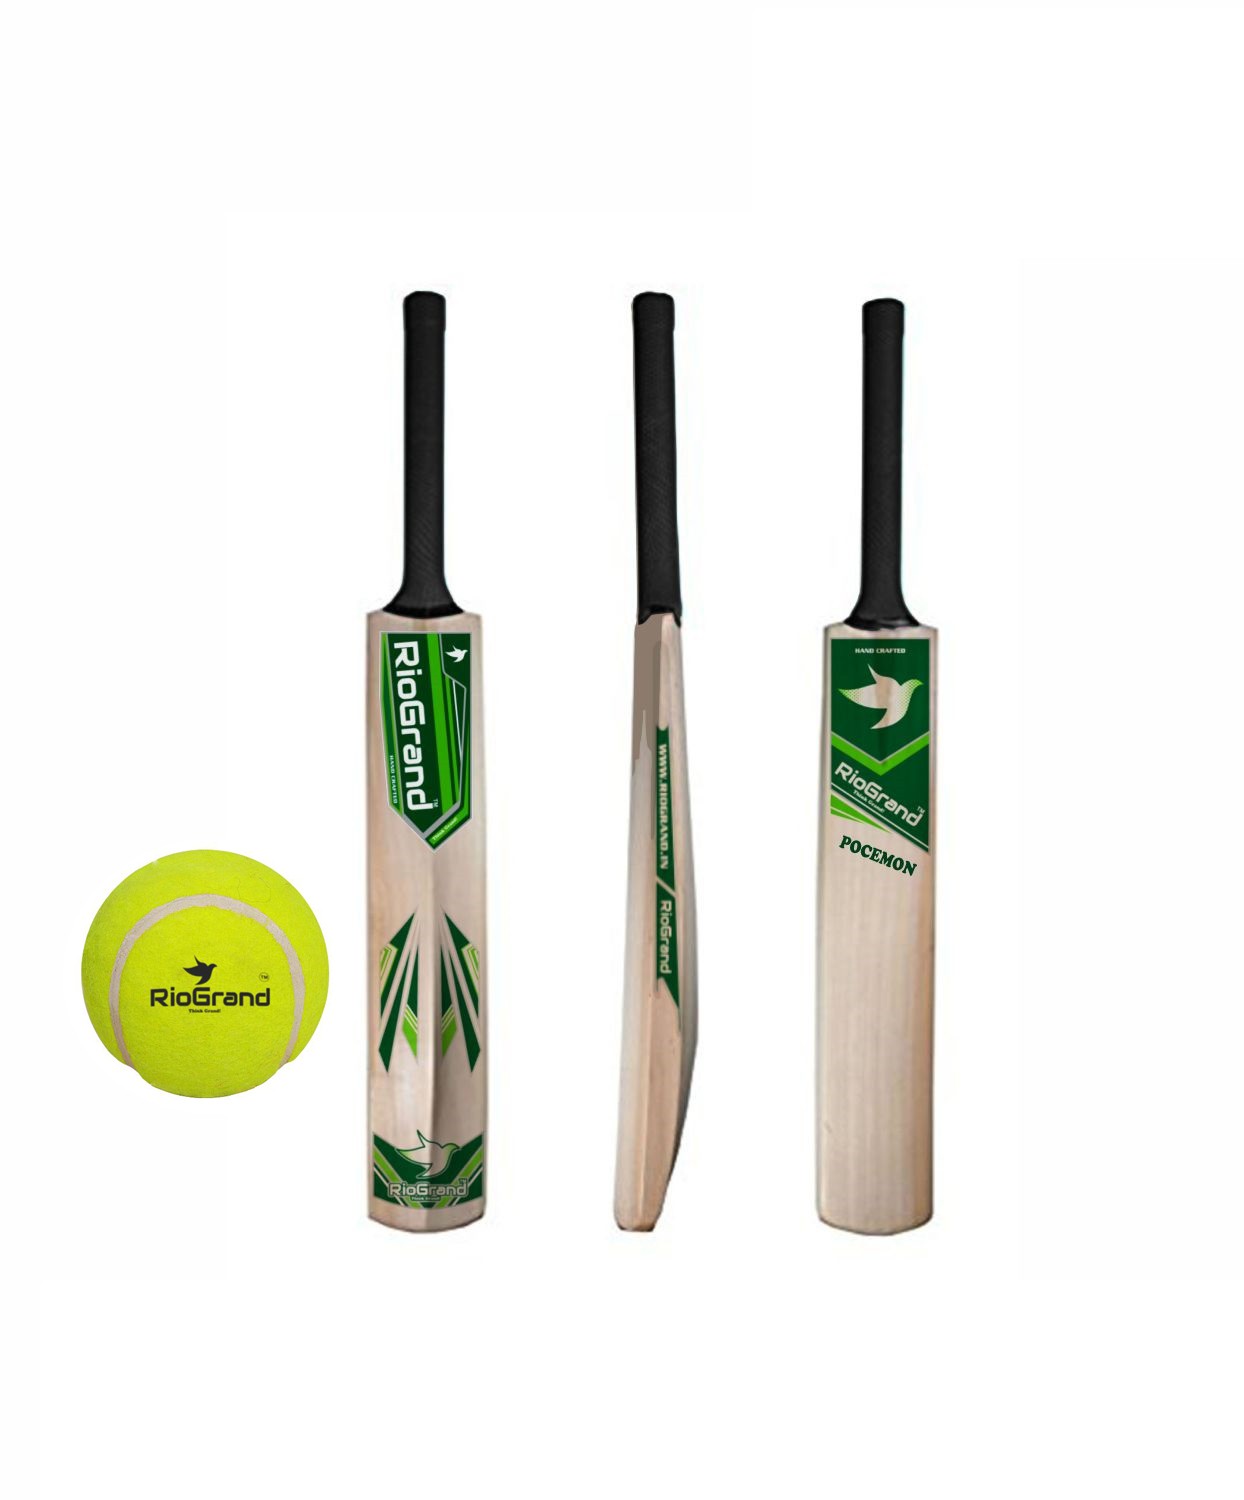 Pokemon Wooden Cricket bat for Hard and Soft Tennis Ball |  With  Soft Tennis Ball